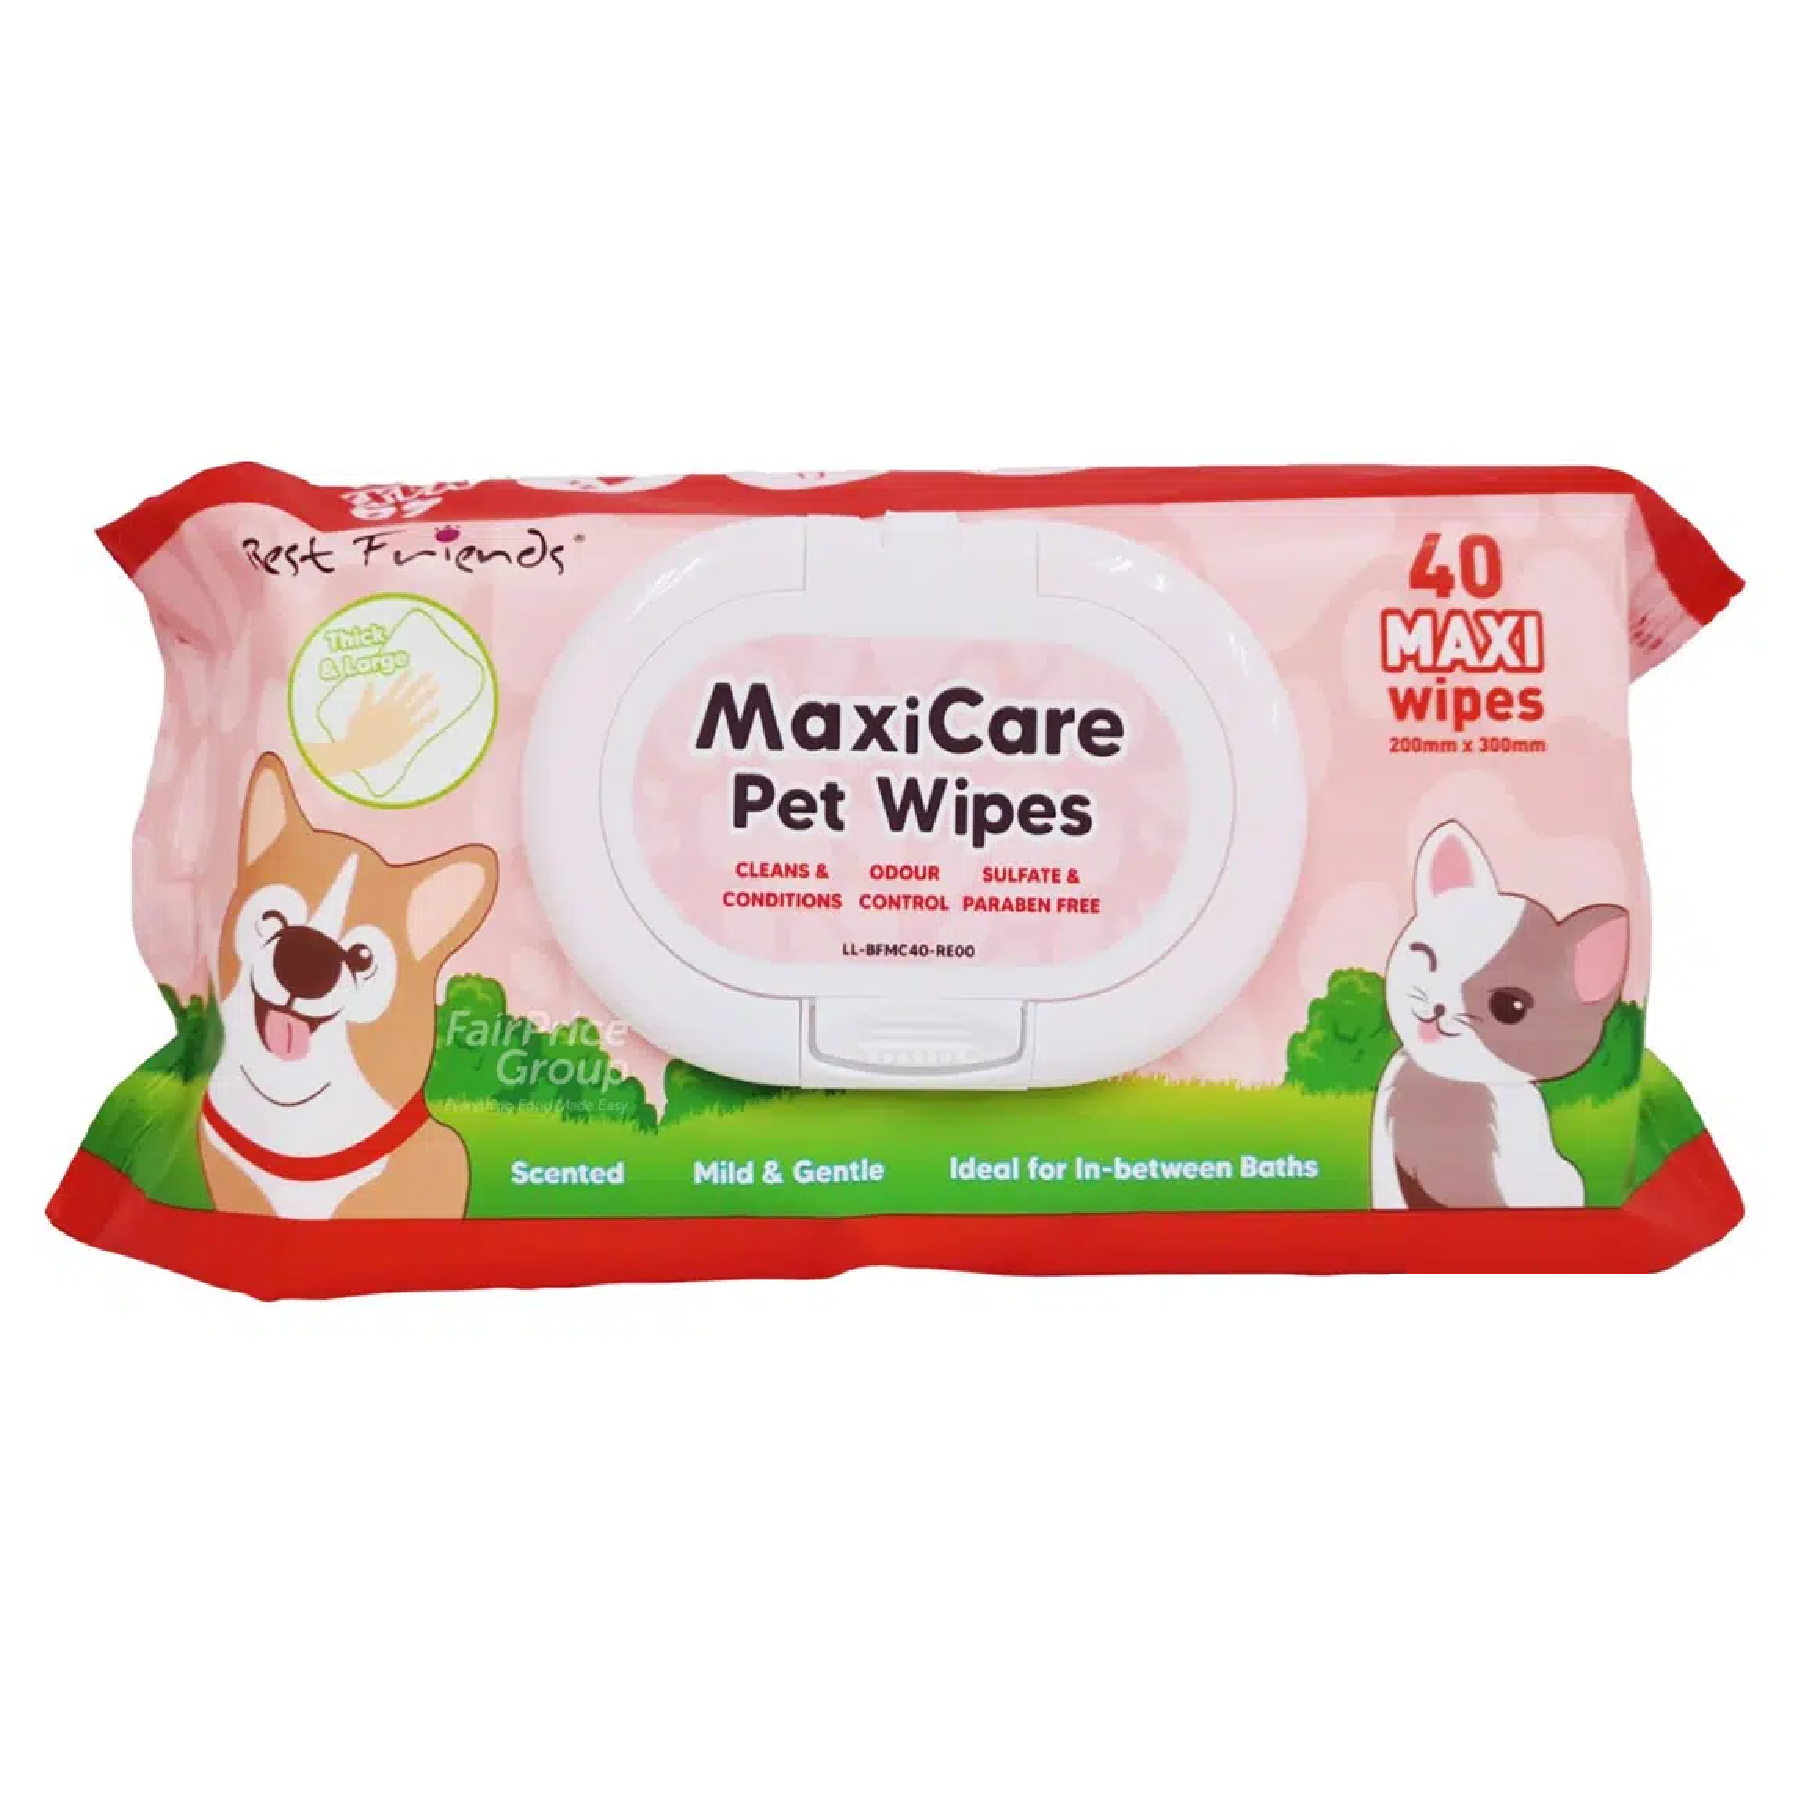 BEST FRIEND MAXI CARE Pet Wipes 40 SHEETS/PACK